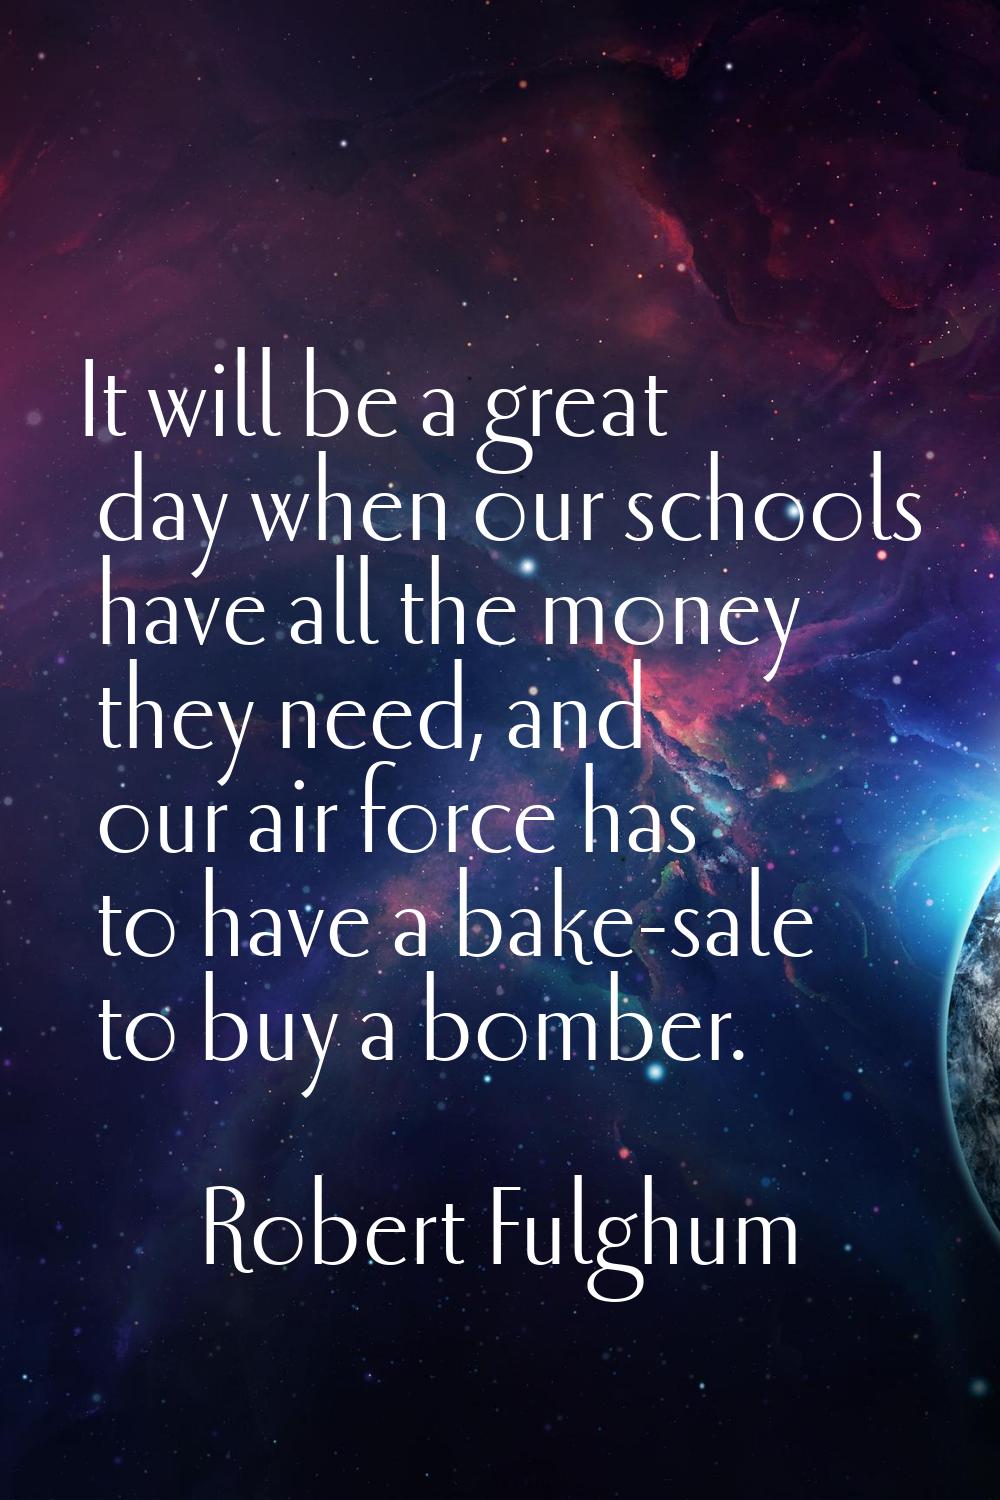 It will be a great day when our schools have all the money they need, and our air force has to have